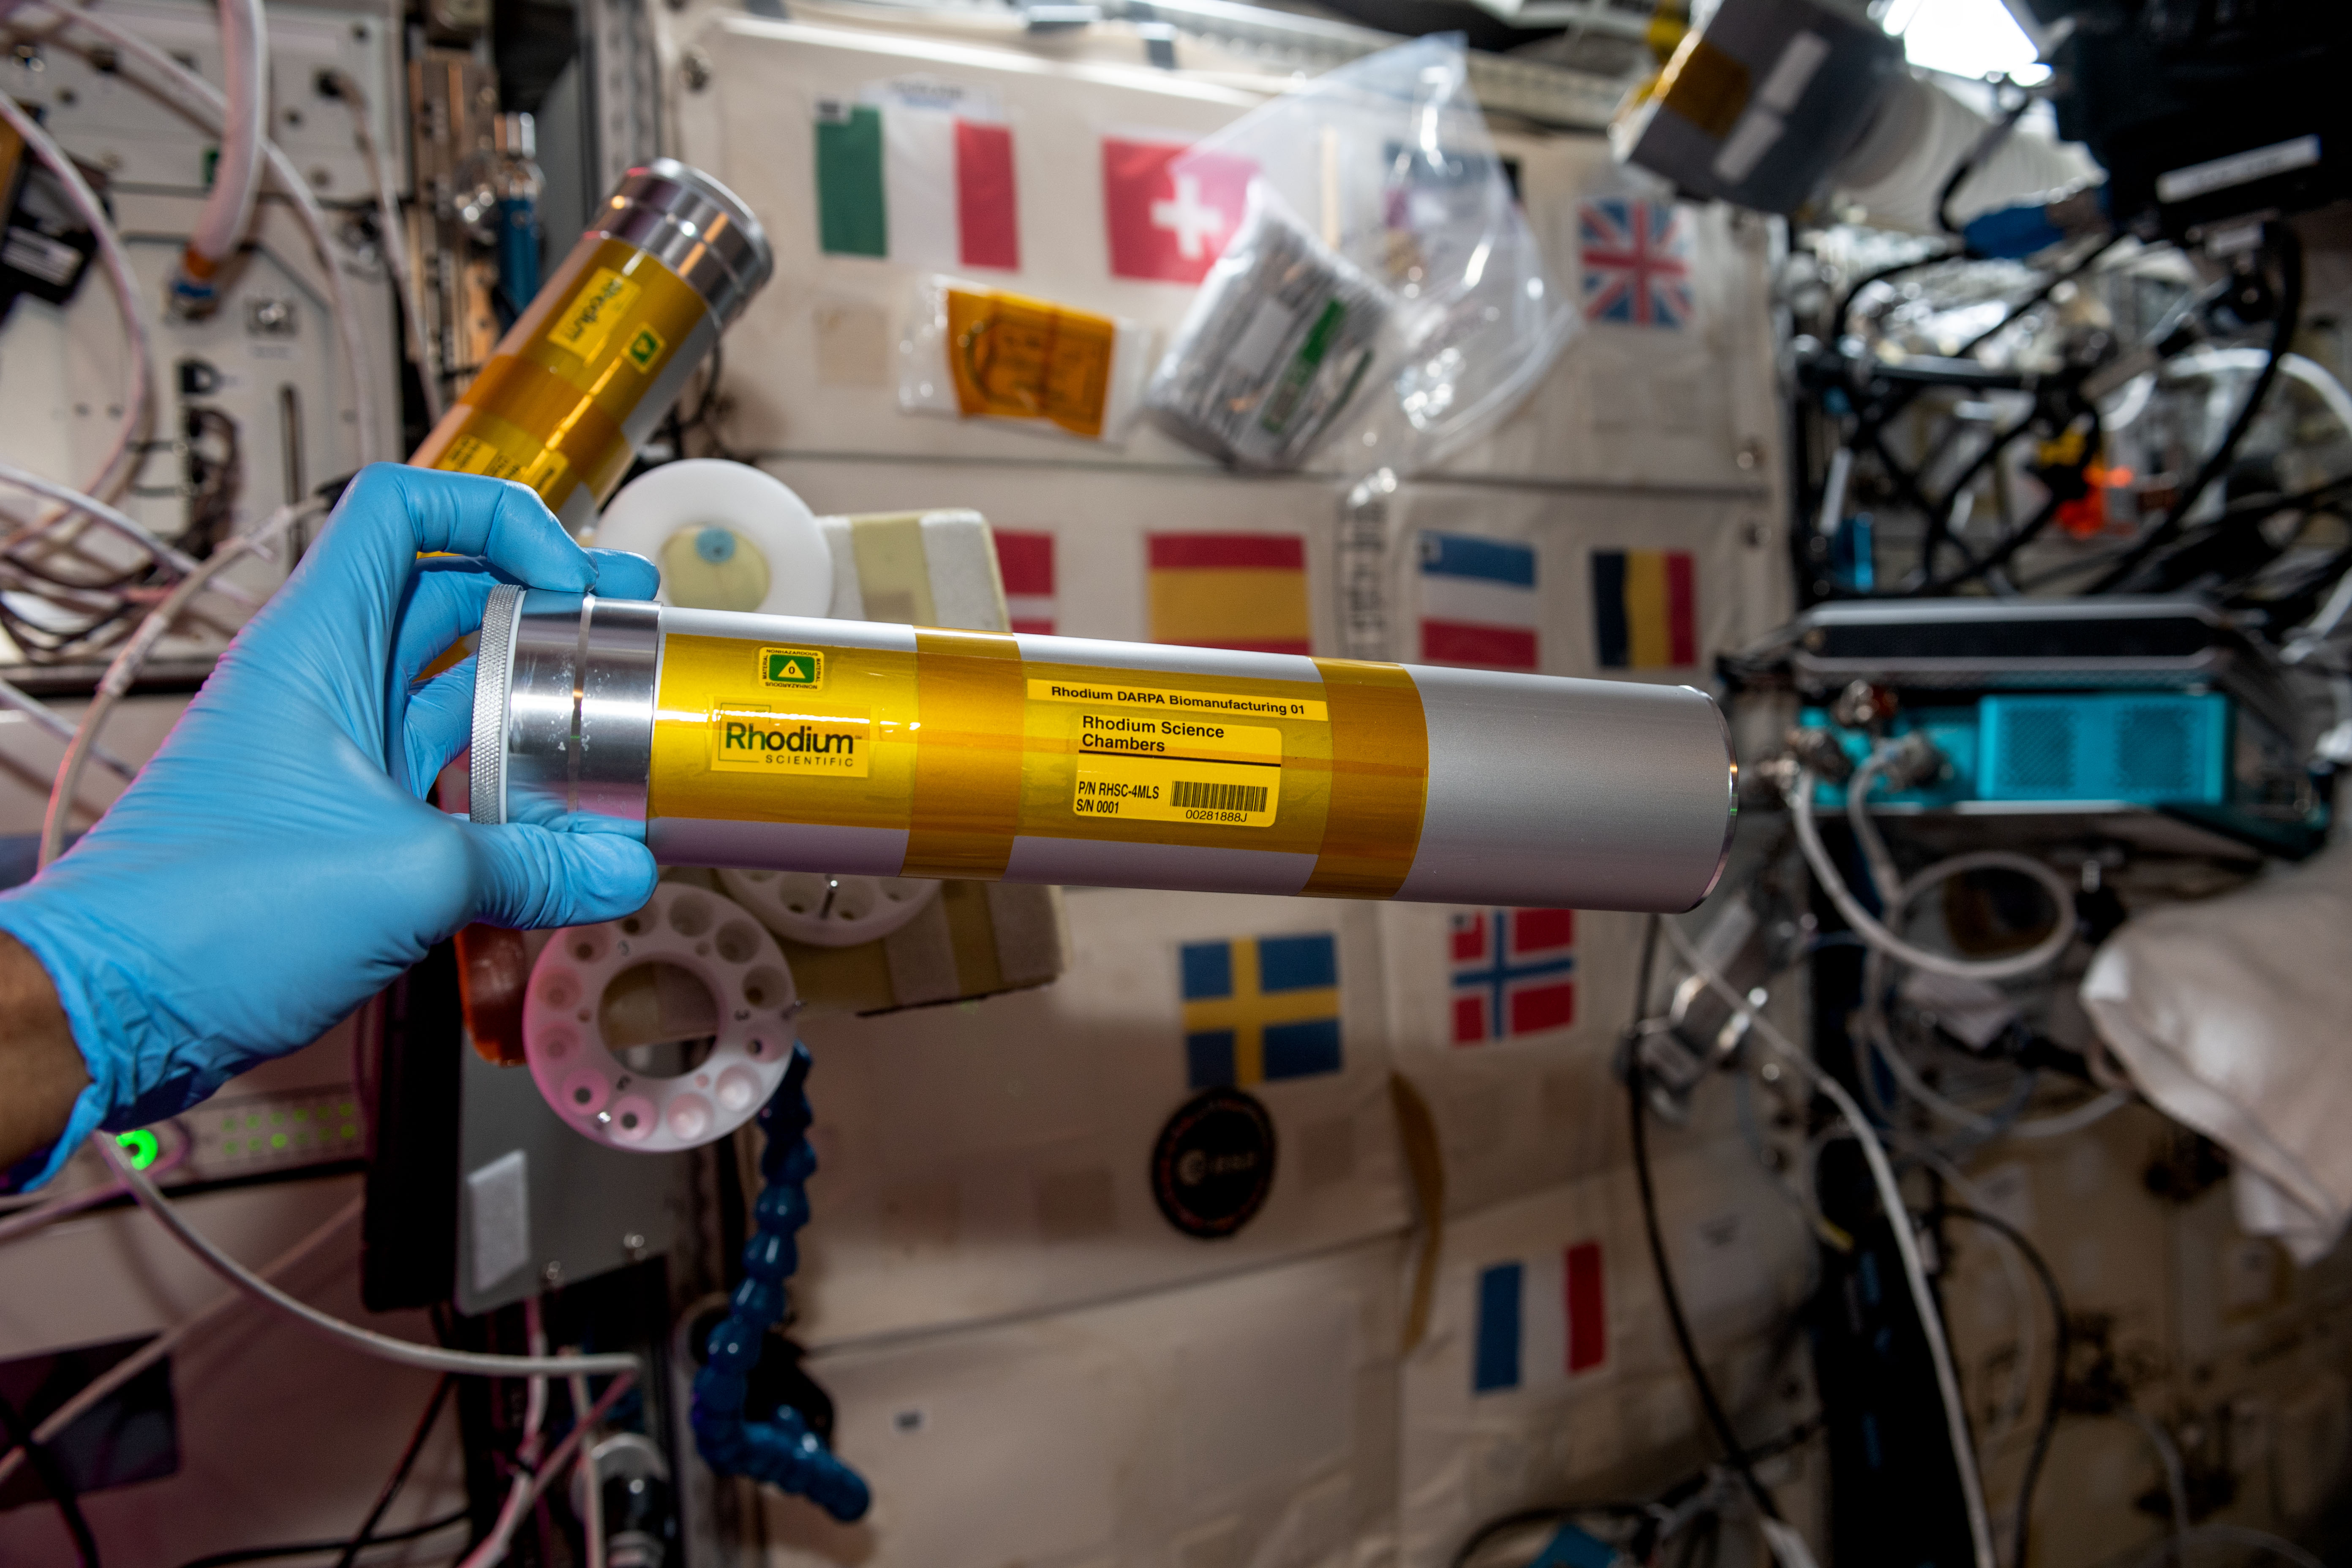 A crew member transfers a science chamber for Rhodium DARPA Biomanufacturing 01, an investigation sponsored by the ISS National Lab that examines gravity’s effect on production of drugs and nutrients from bacteria and yeast.